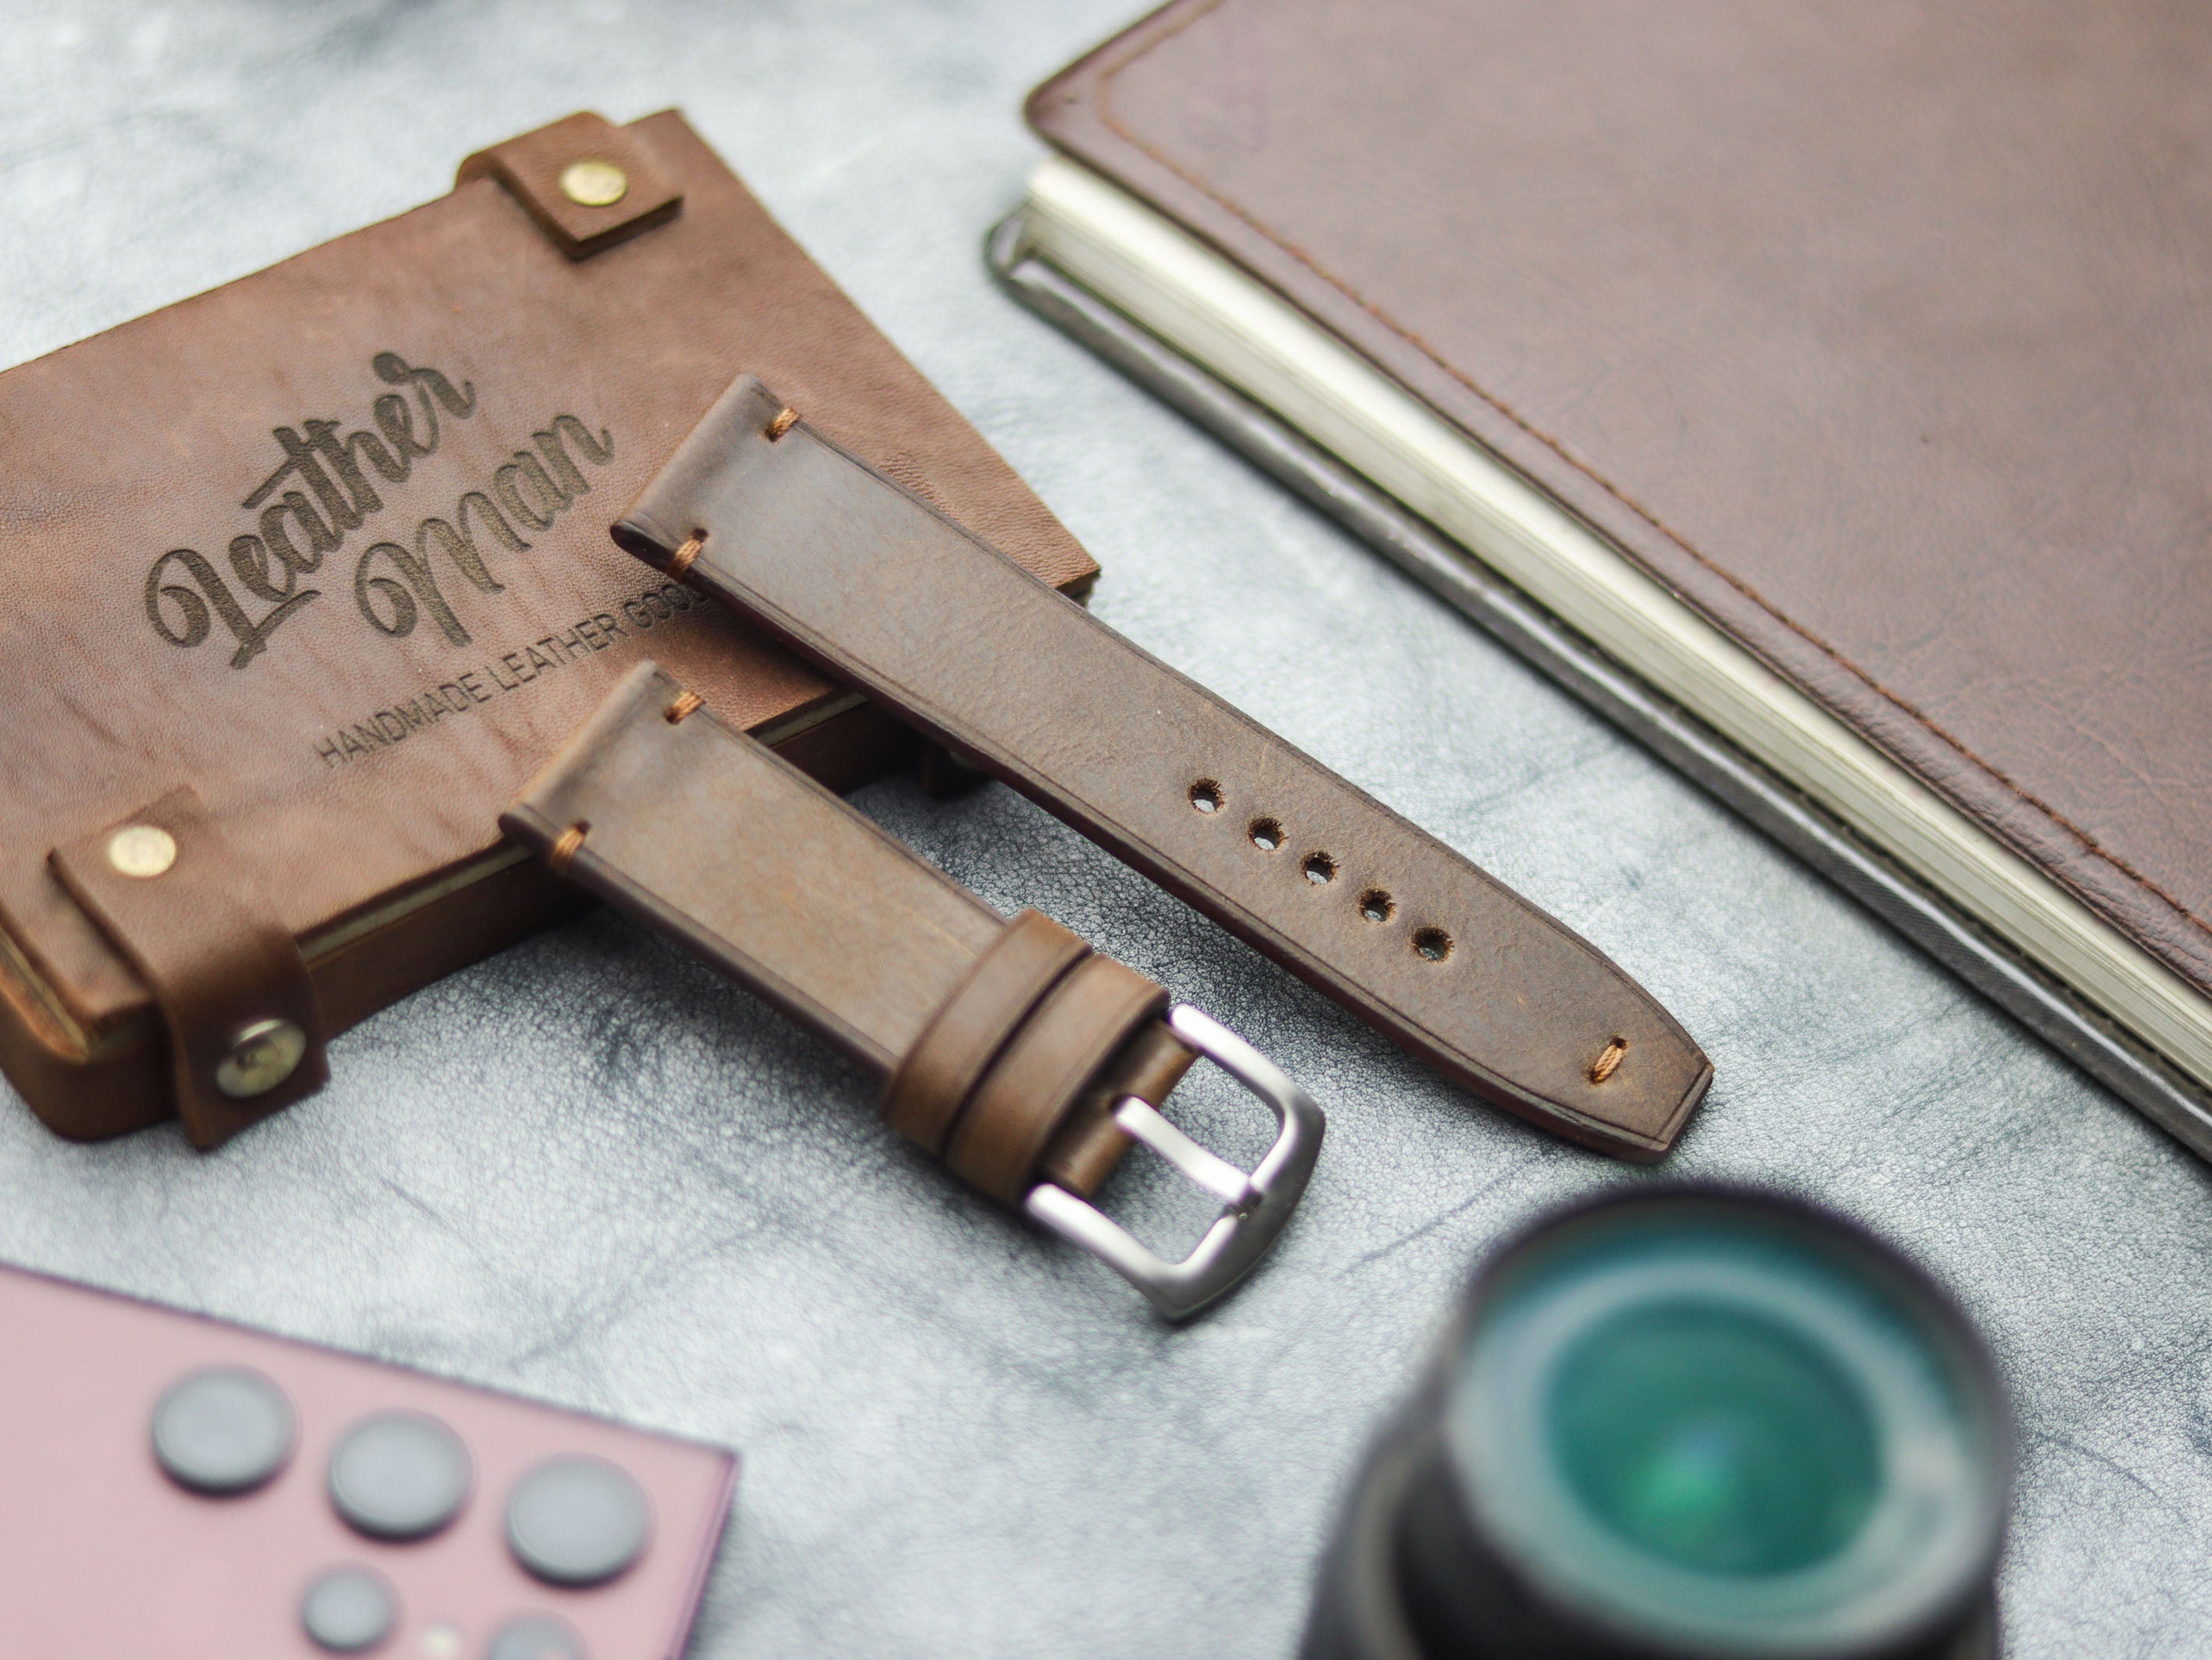 WOOD BROWN HAND-CRAFTED WATCH STRAPS - MINIMAL STITCHED